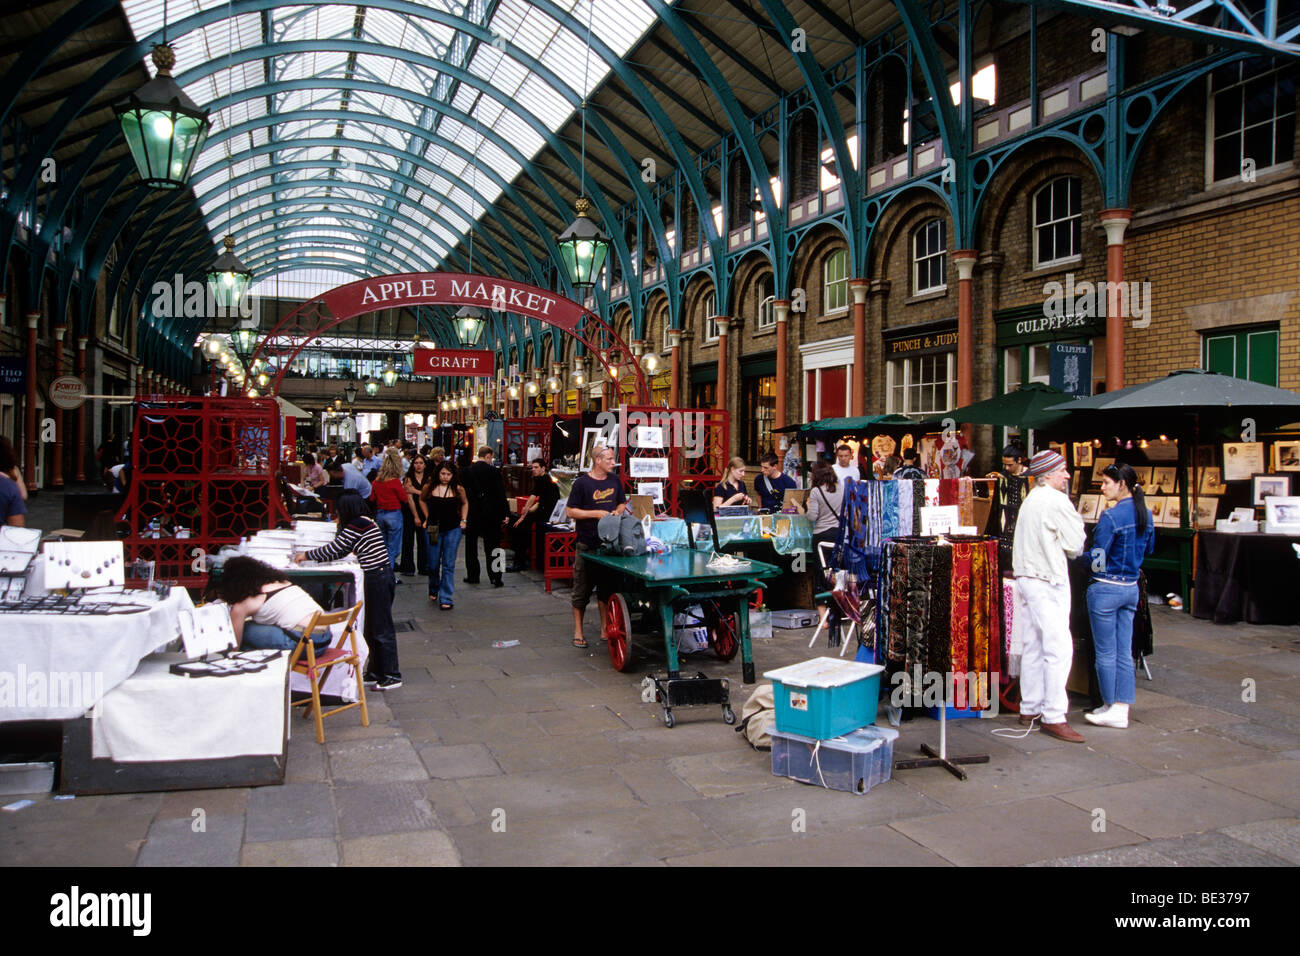 Shopping at Covent Garden Market, The Market, West End, London, England, UK, Europe Stock Photo